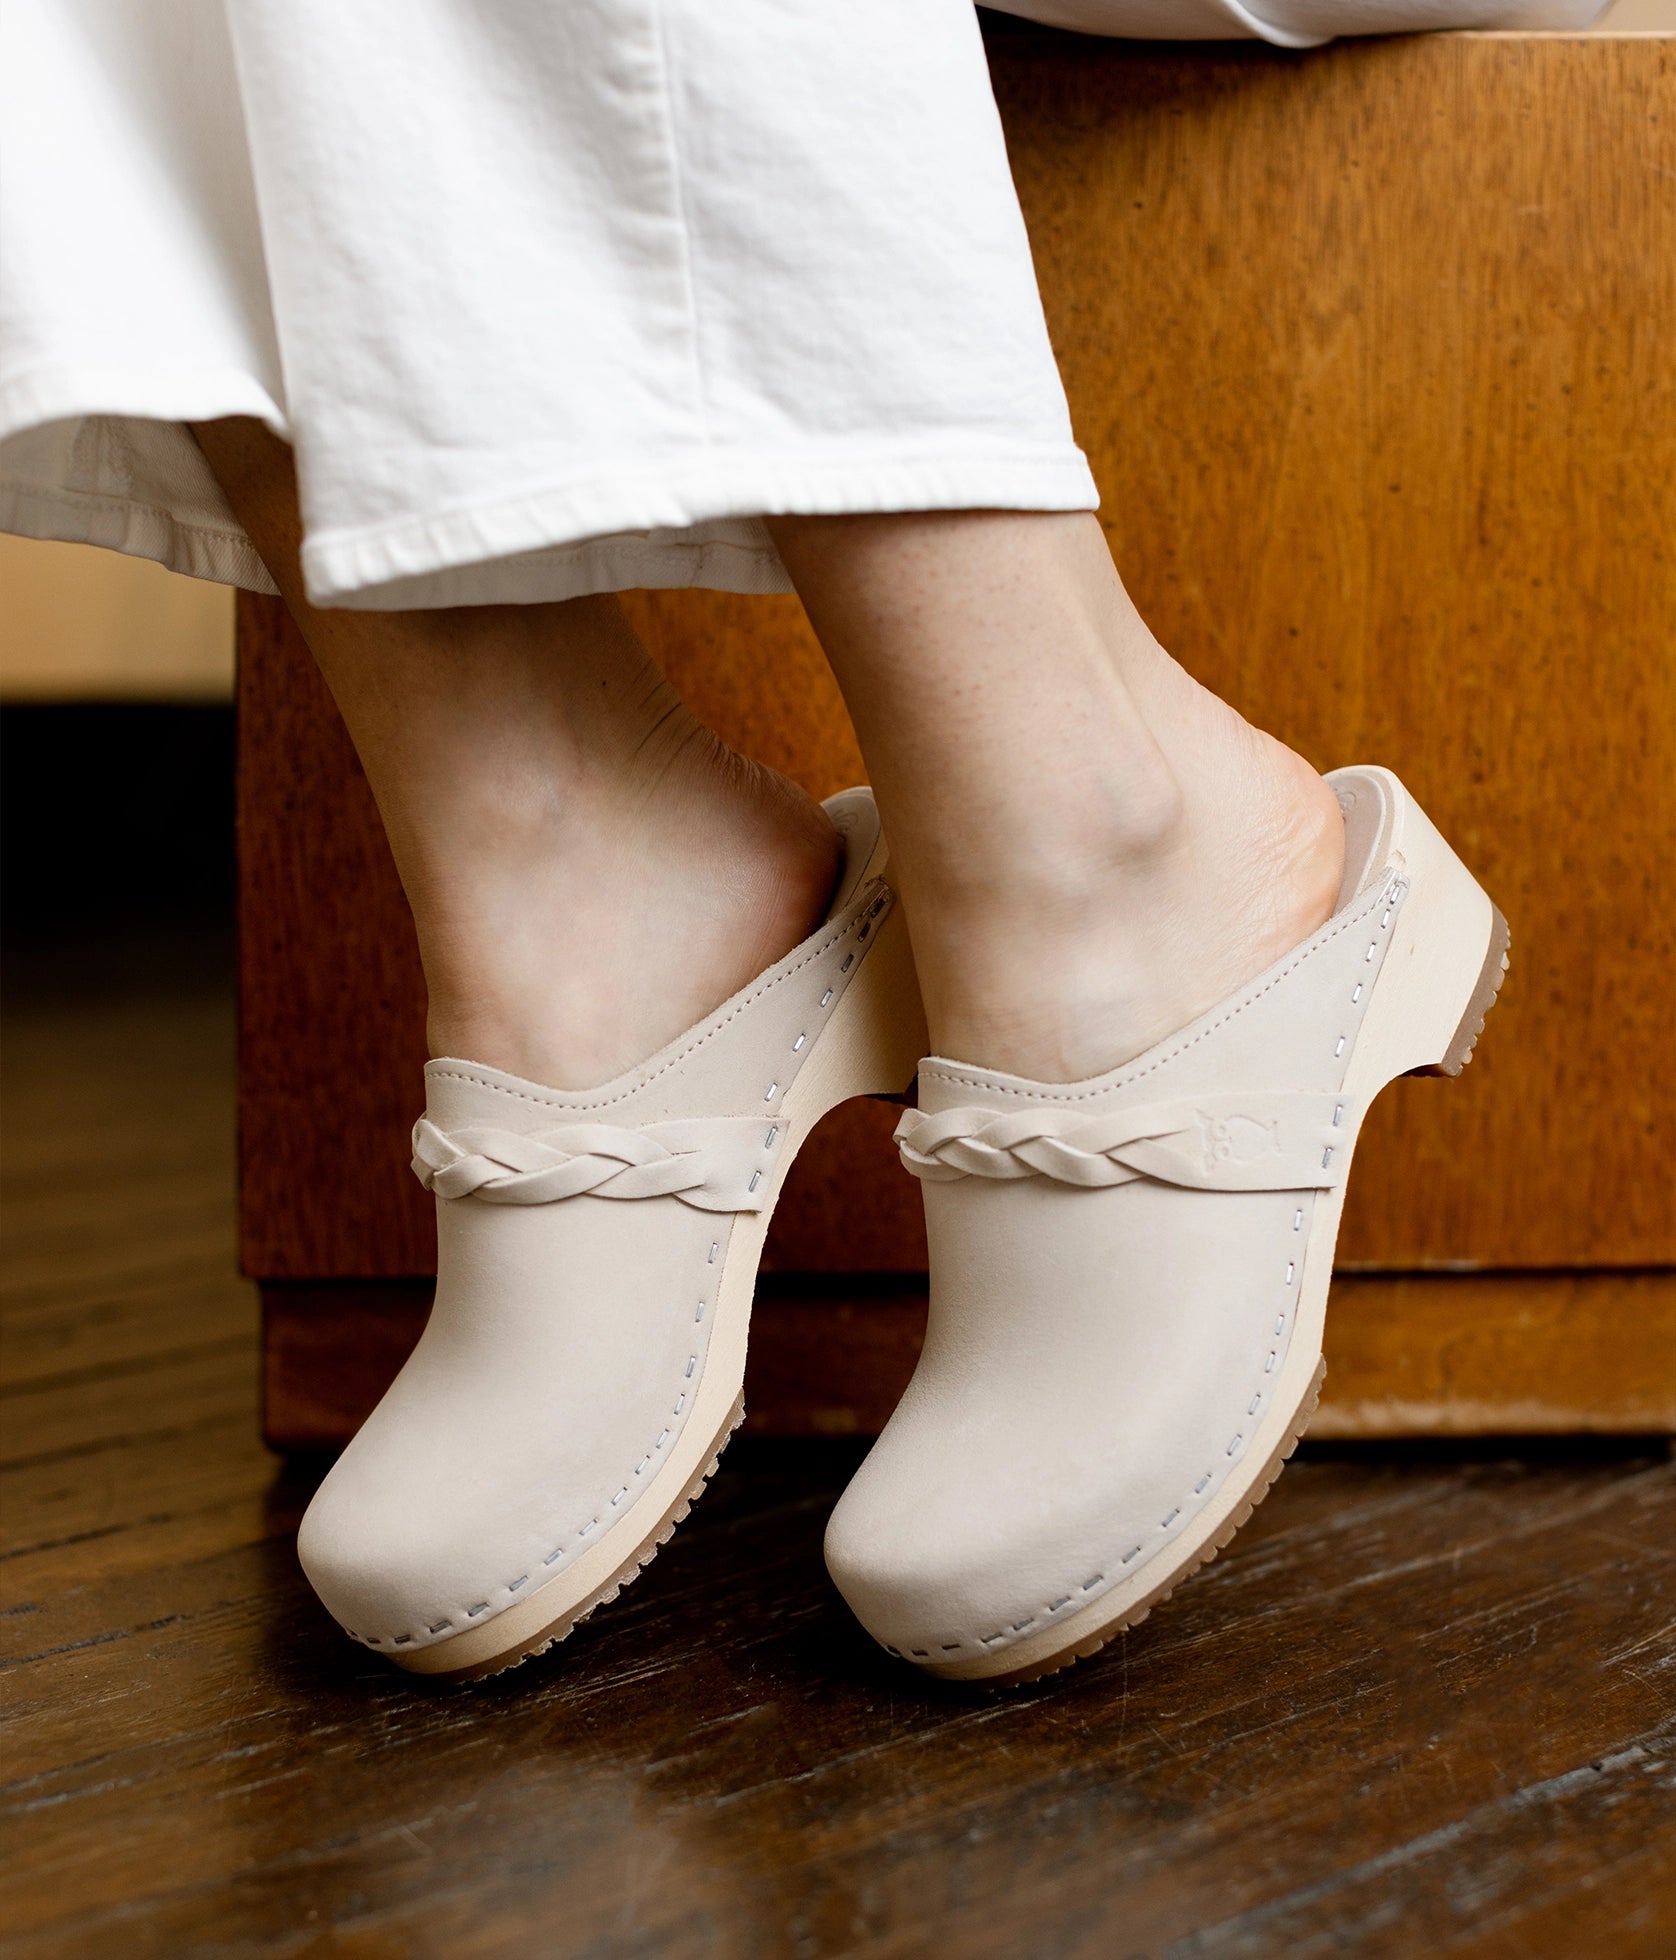 low heeled clog mules in sand white nubuck leather with a braided strap stapled on a light wooden base